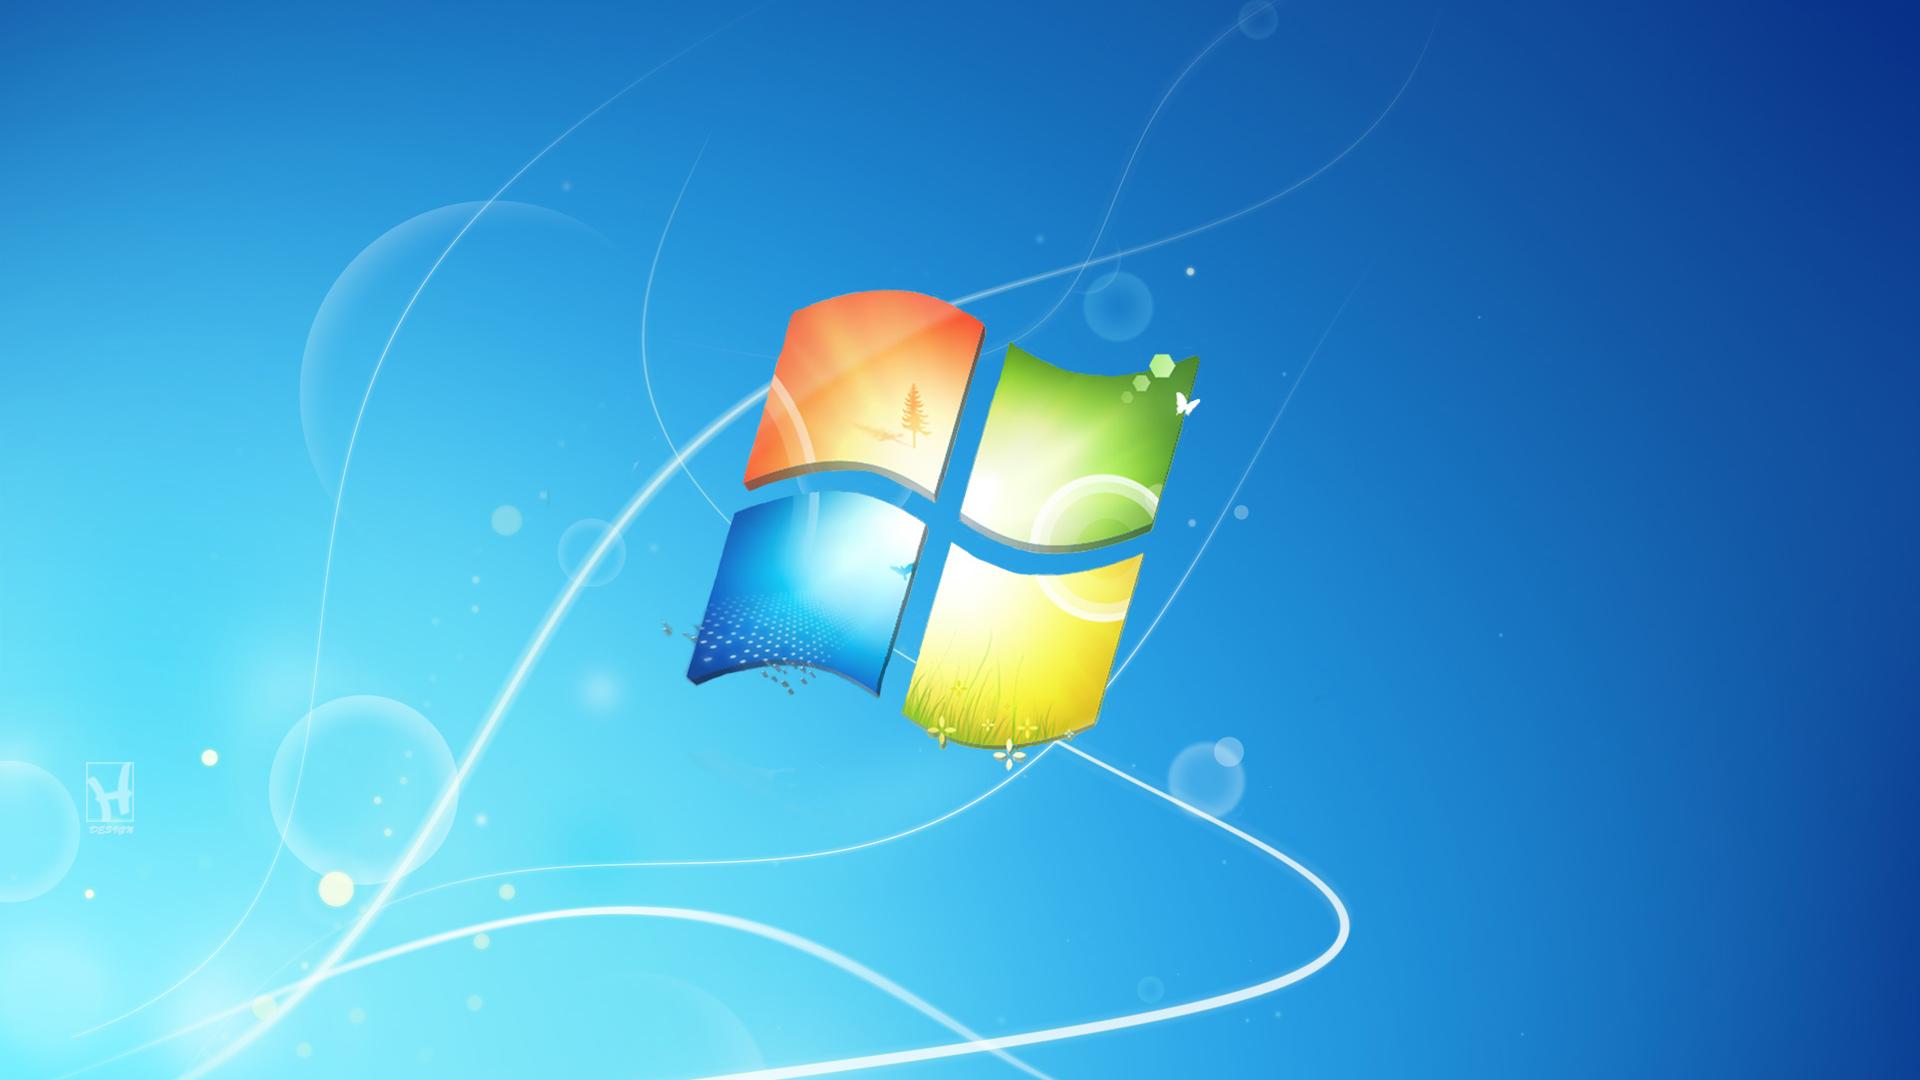  Background Windows Xp System Widescreen and HD background Wallpaper